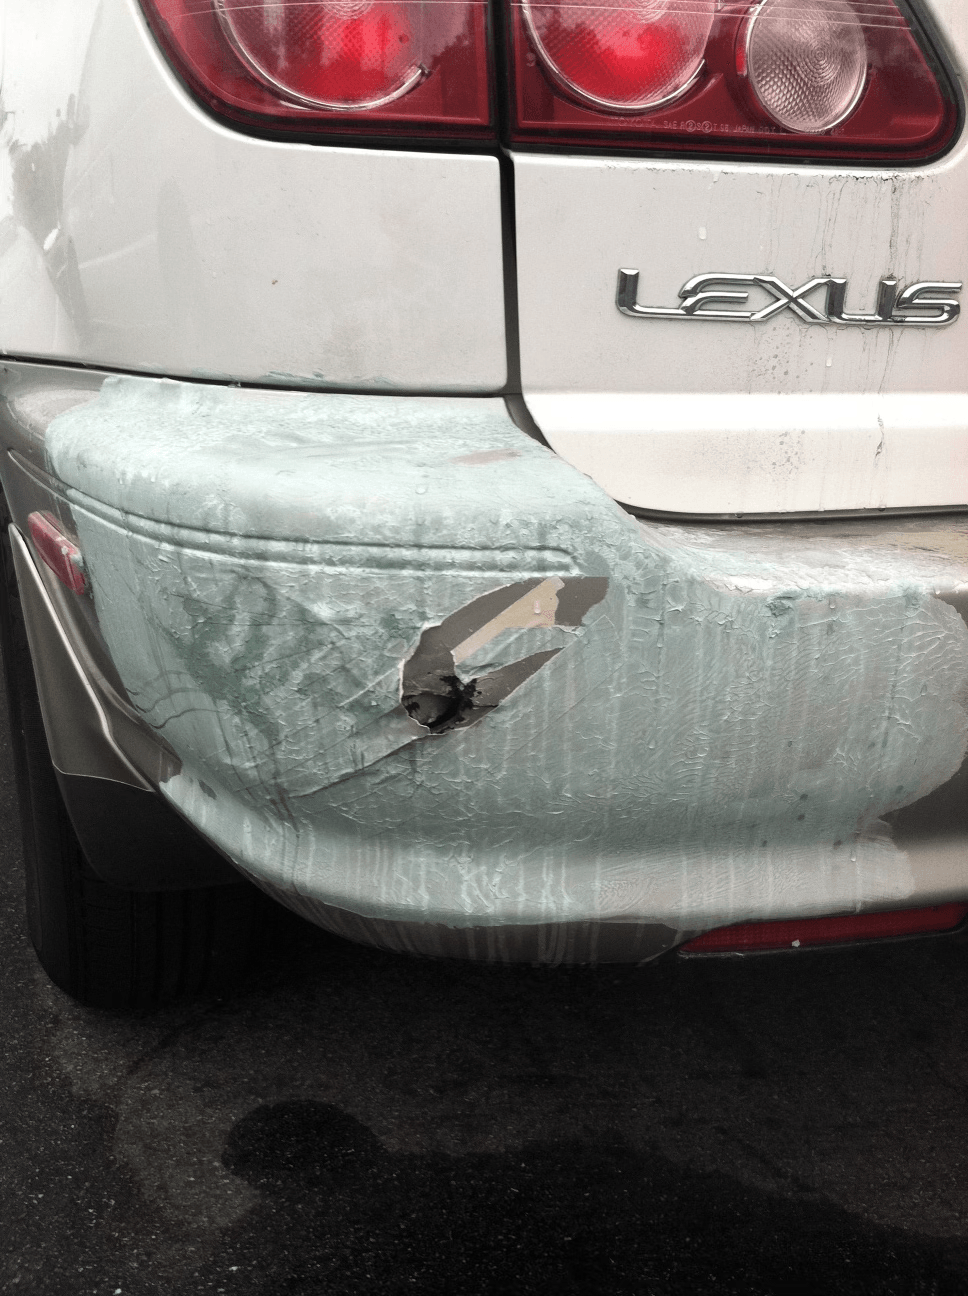 Mobile Dent Repair Services in Palm Springs, CA